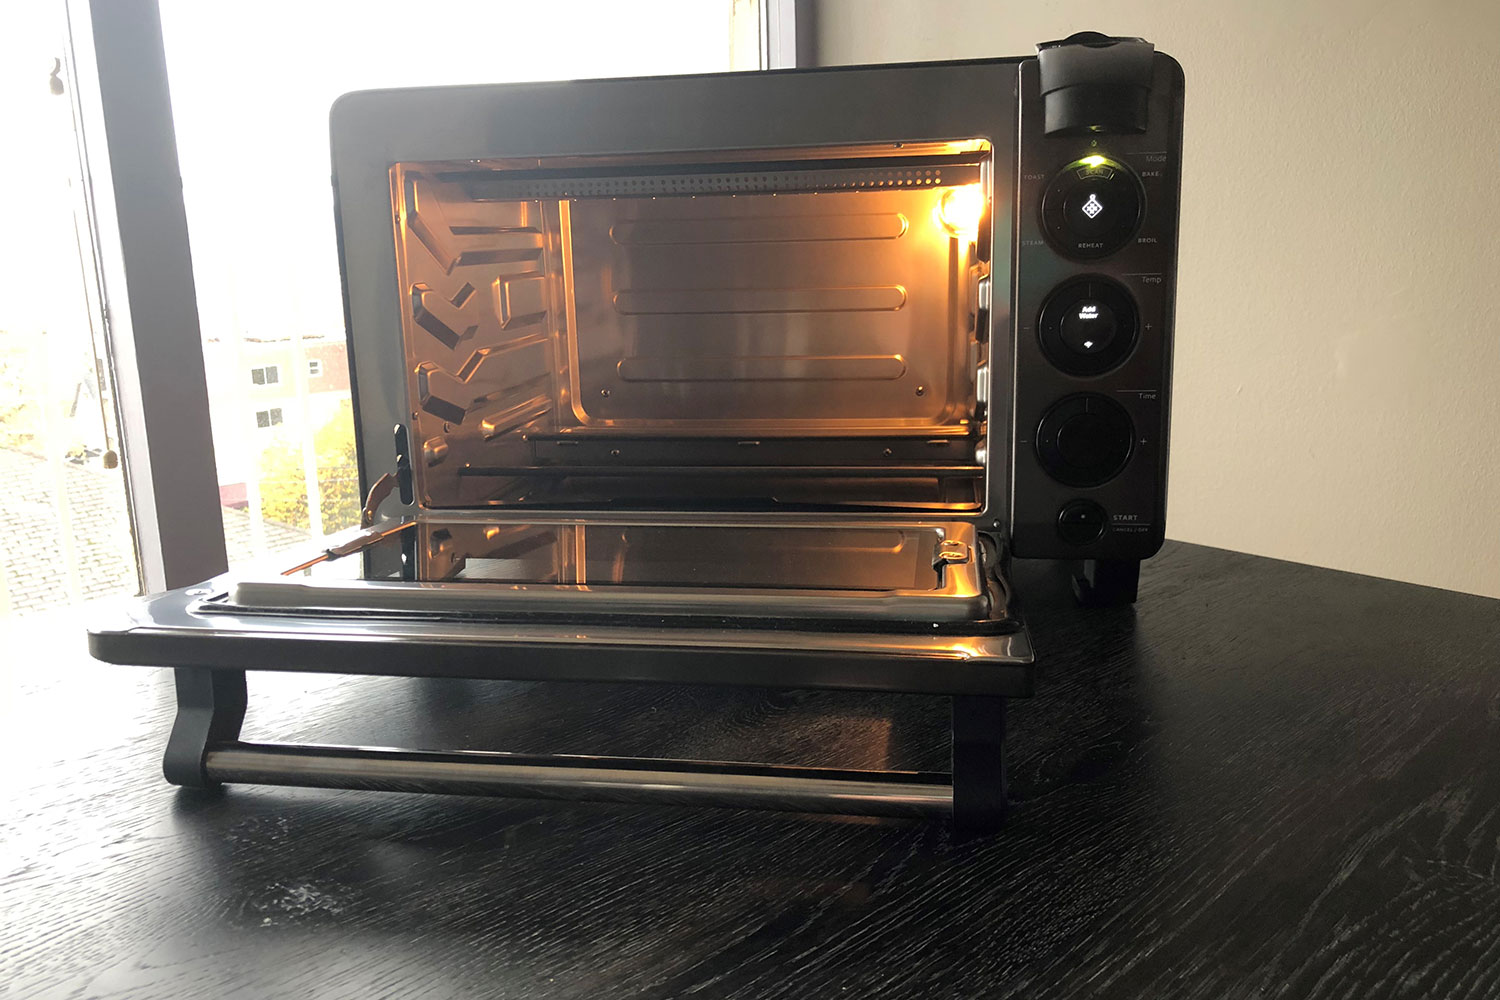 https://www.digitaltrends.com/wp-content/uploads/2018/11/tovala-steam-oven-review-113.jpg?fit=1500%2C1000&p=1